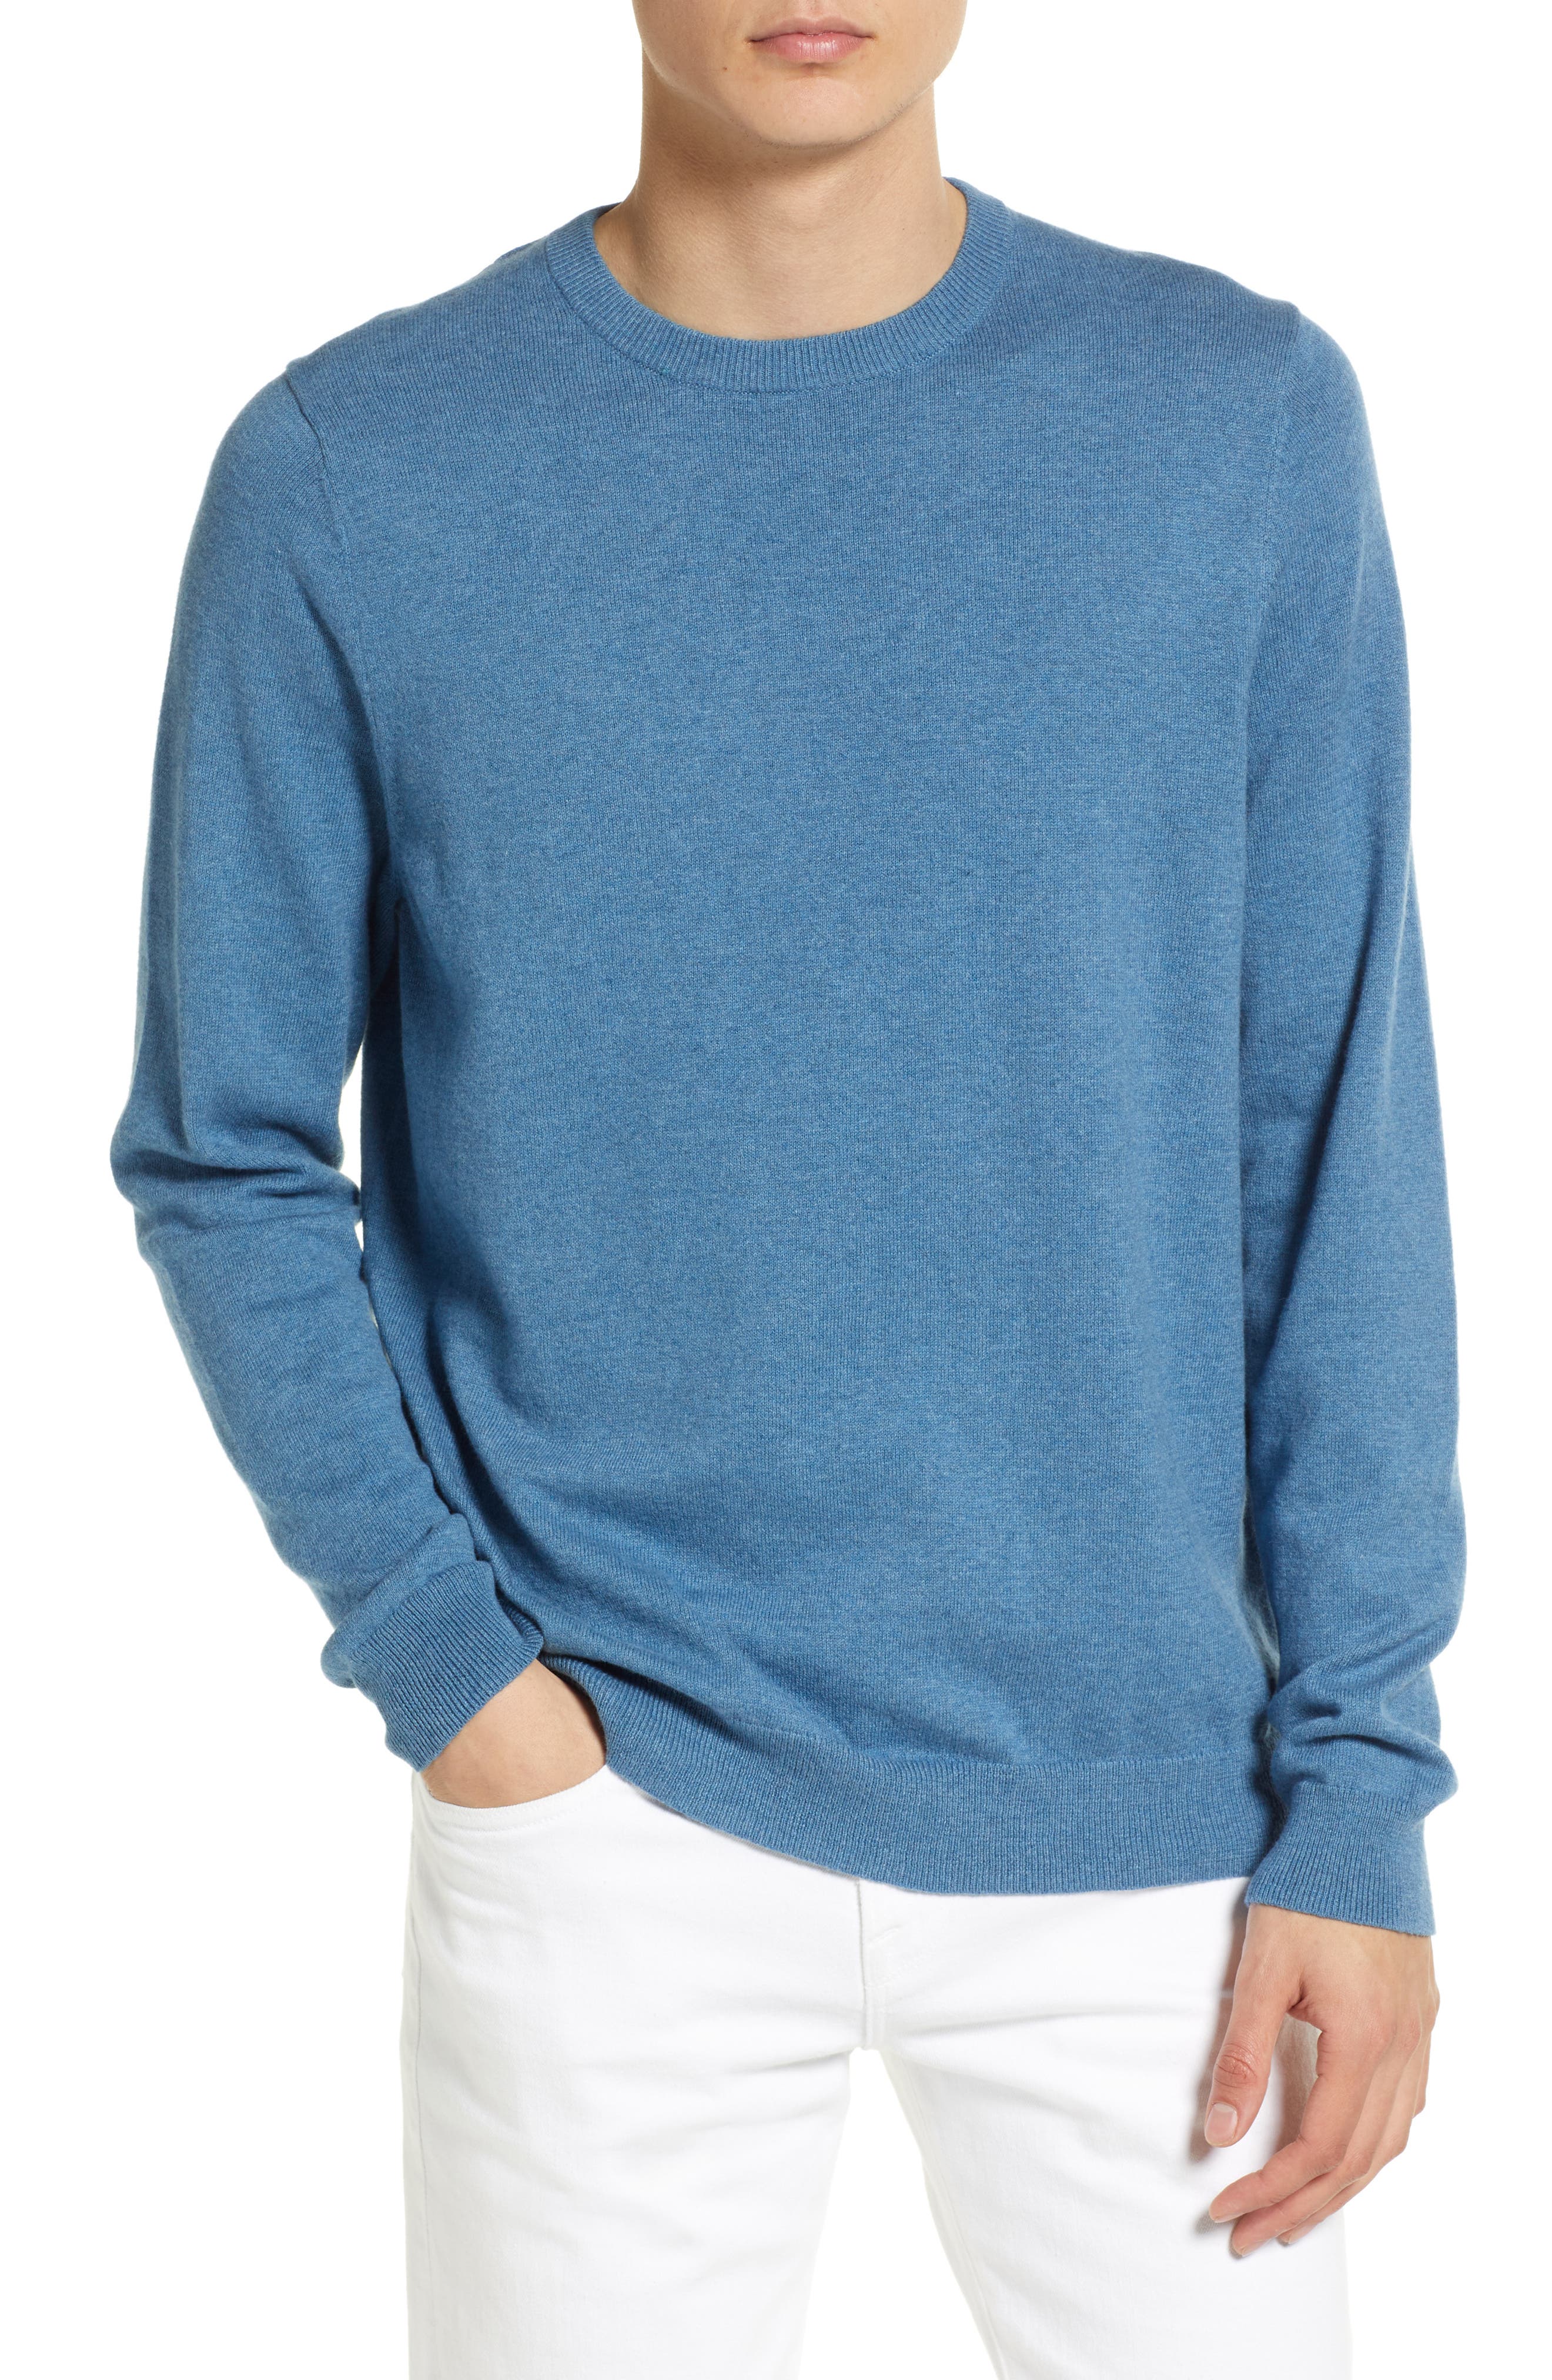 Mens Clothing Sweaters and knitwear Zipped sweaters for Men Cruciani Sweater in Pastel Blue Blue 